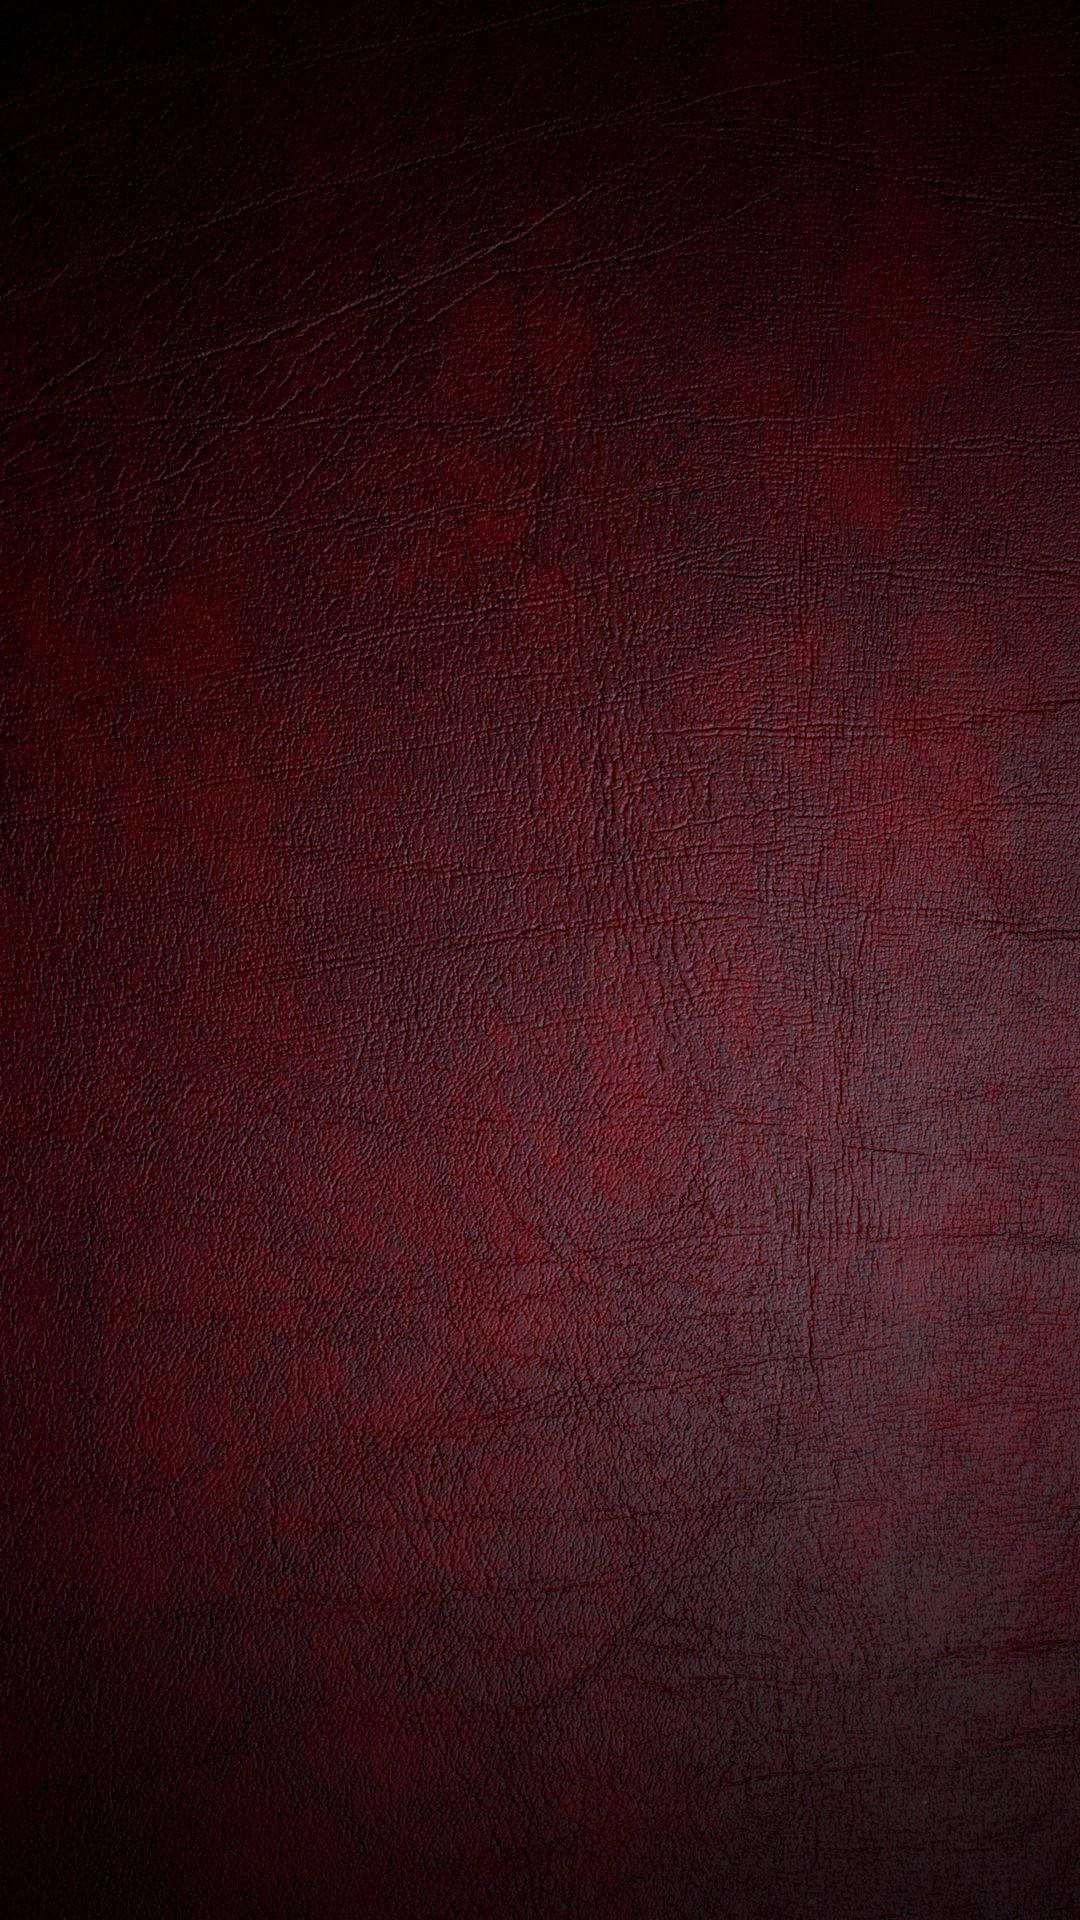 Red And Black Leather iPhone Wallpaper